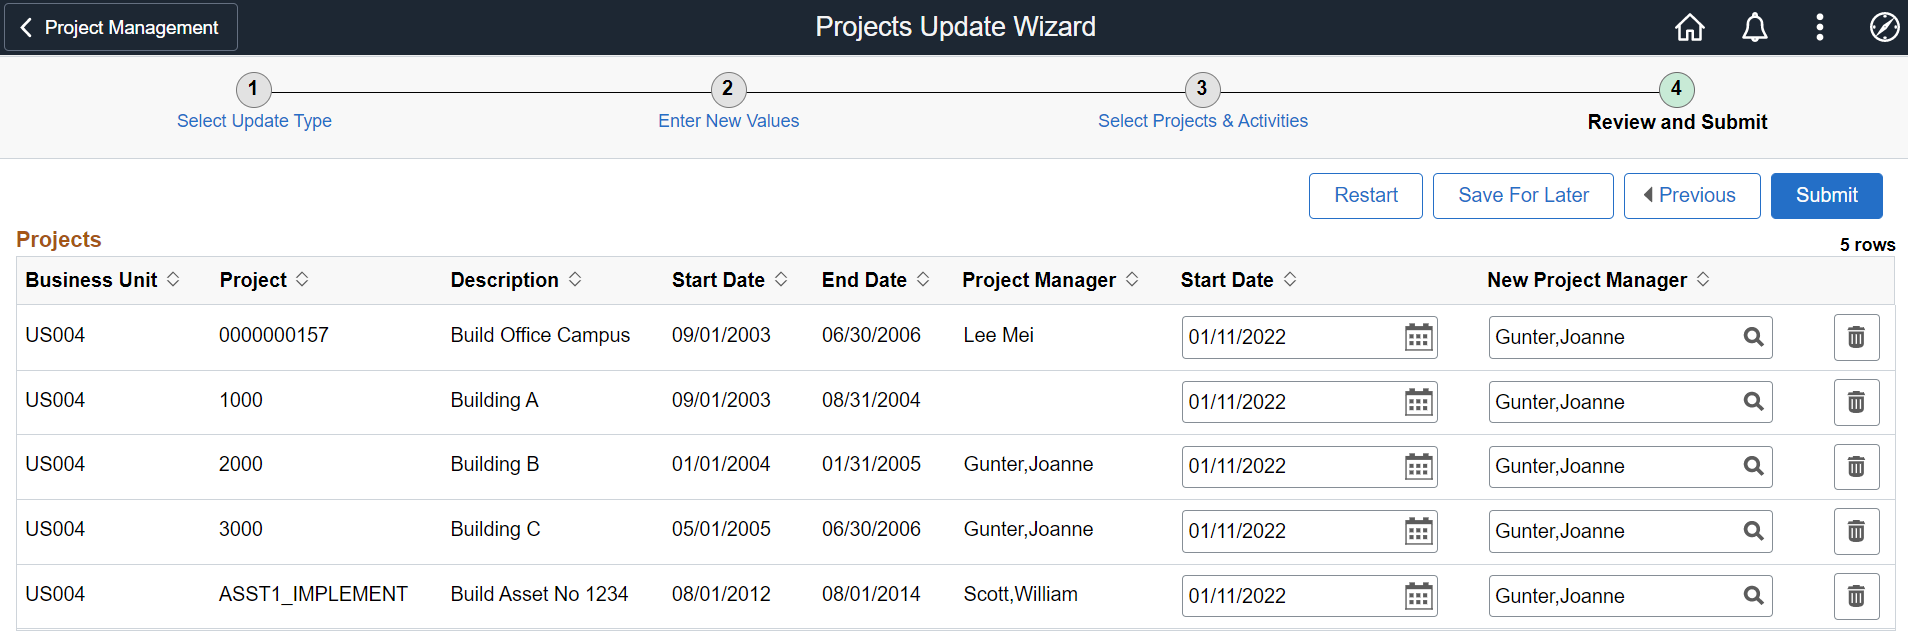 Project Update Wizard - Review and Submit page